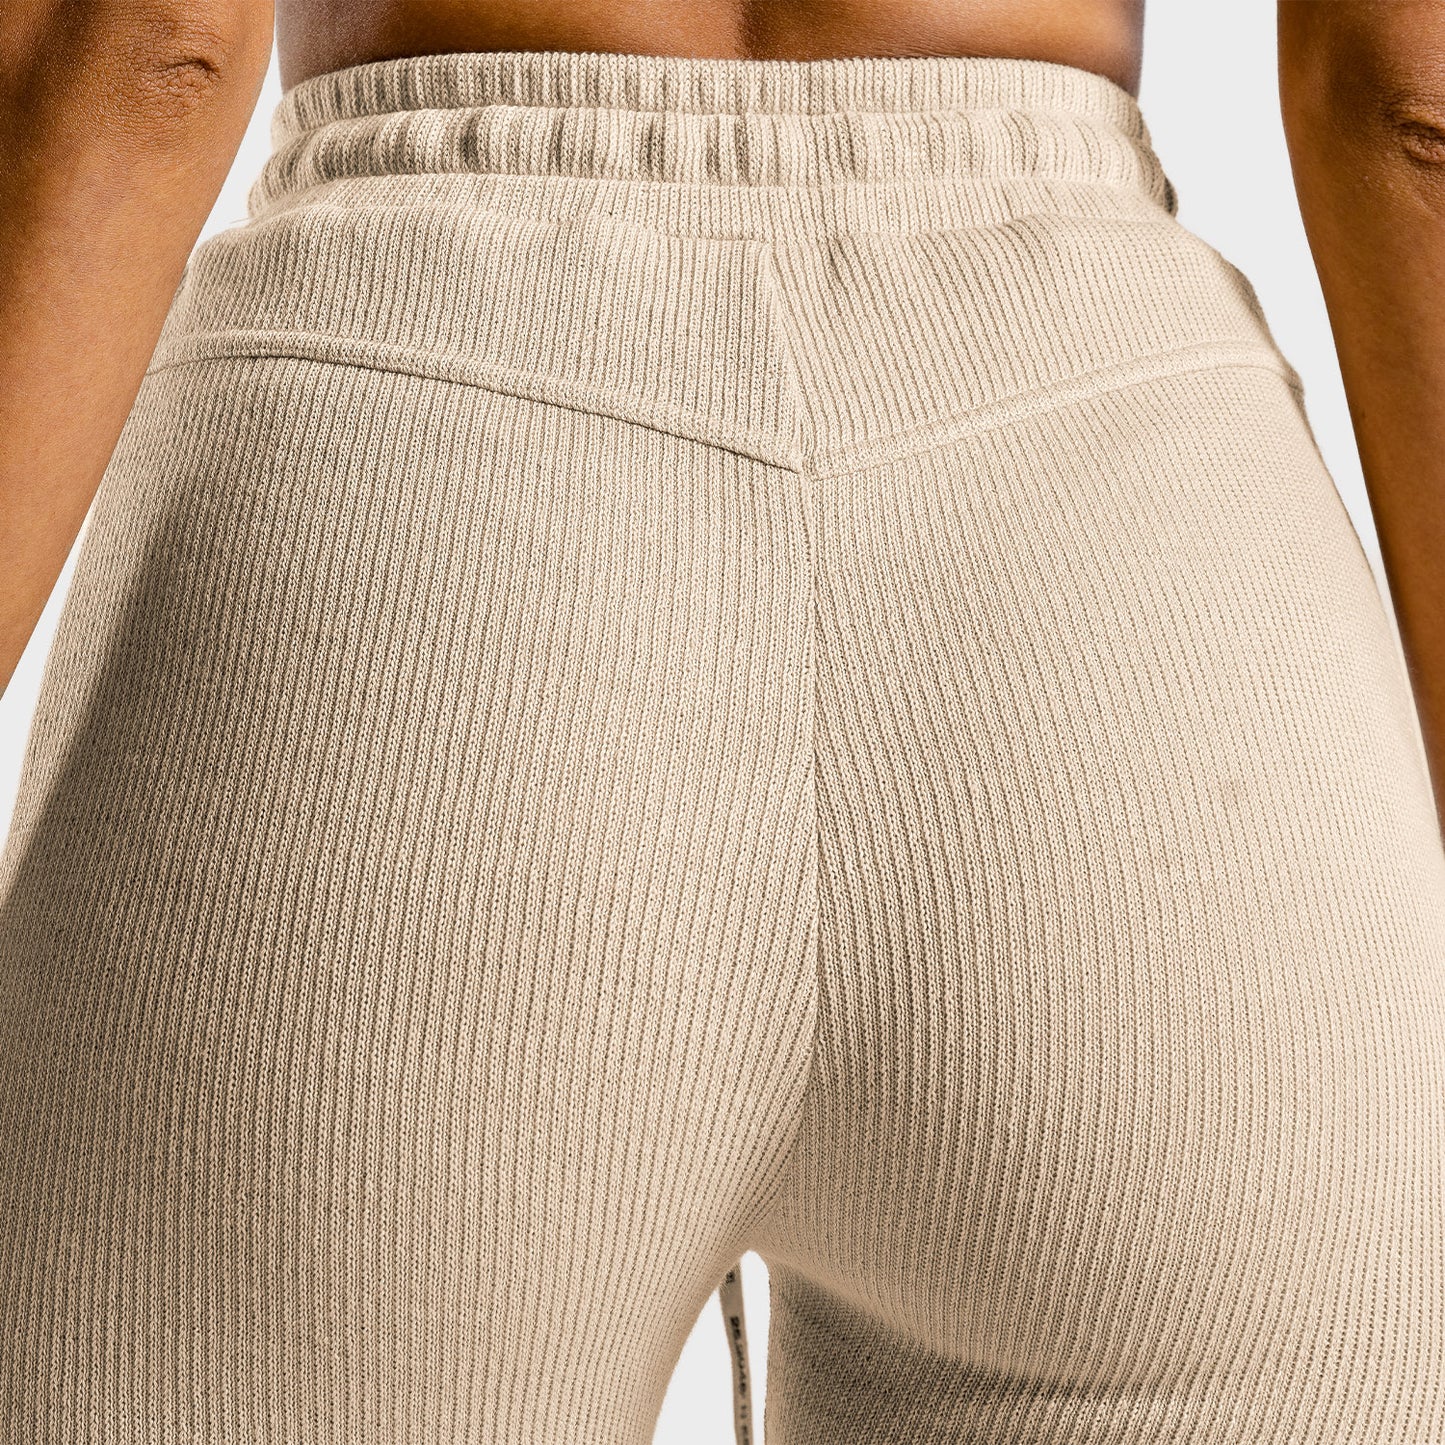 squatwolf-gym-pants-for-women-luxe-joggers-stone-workout-clothes